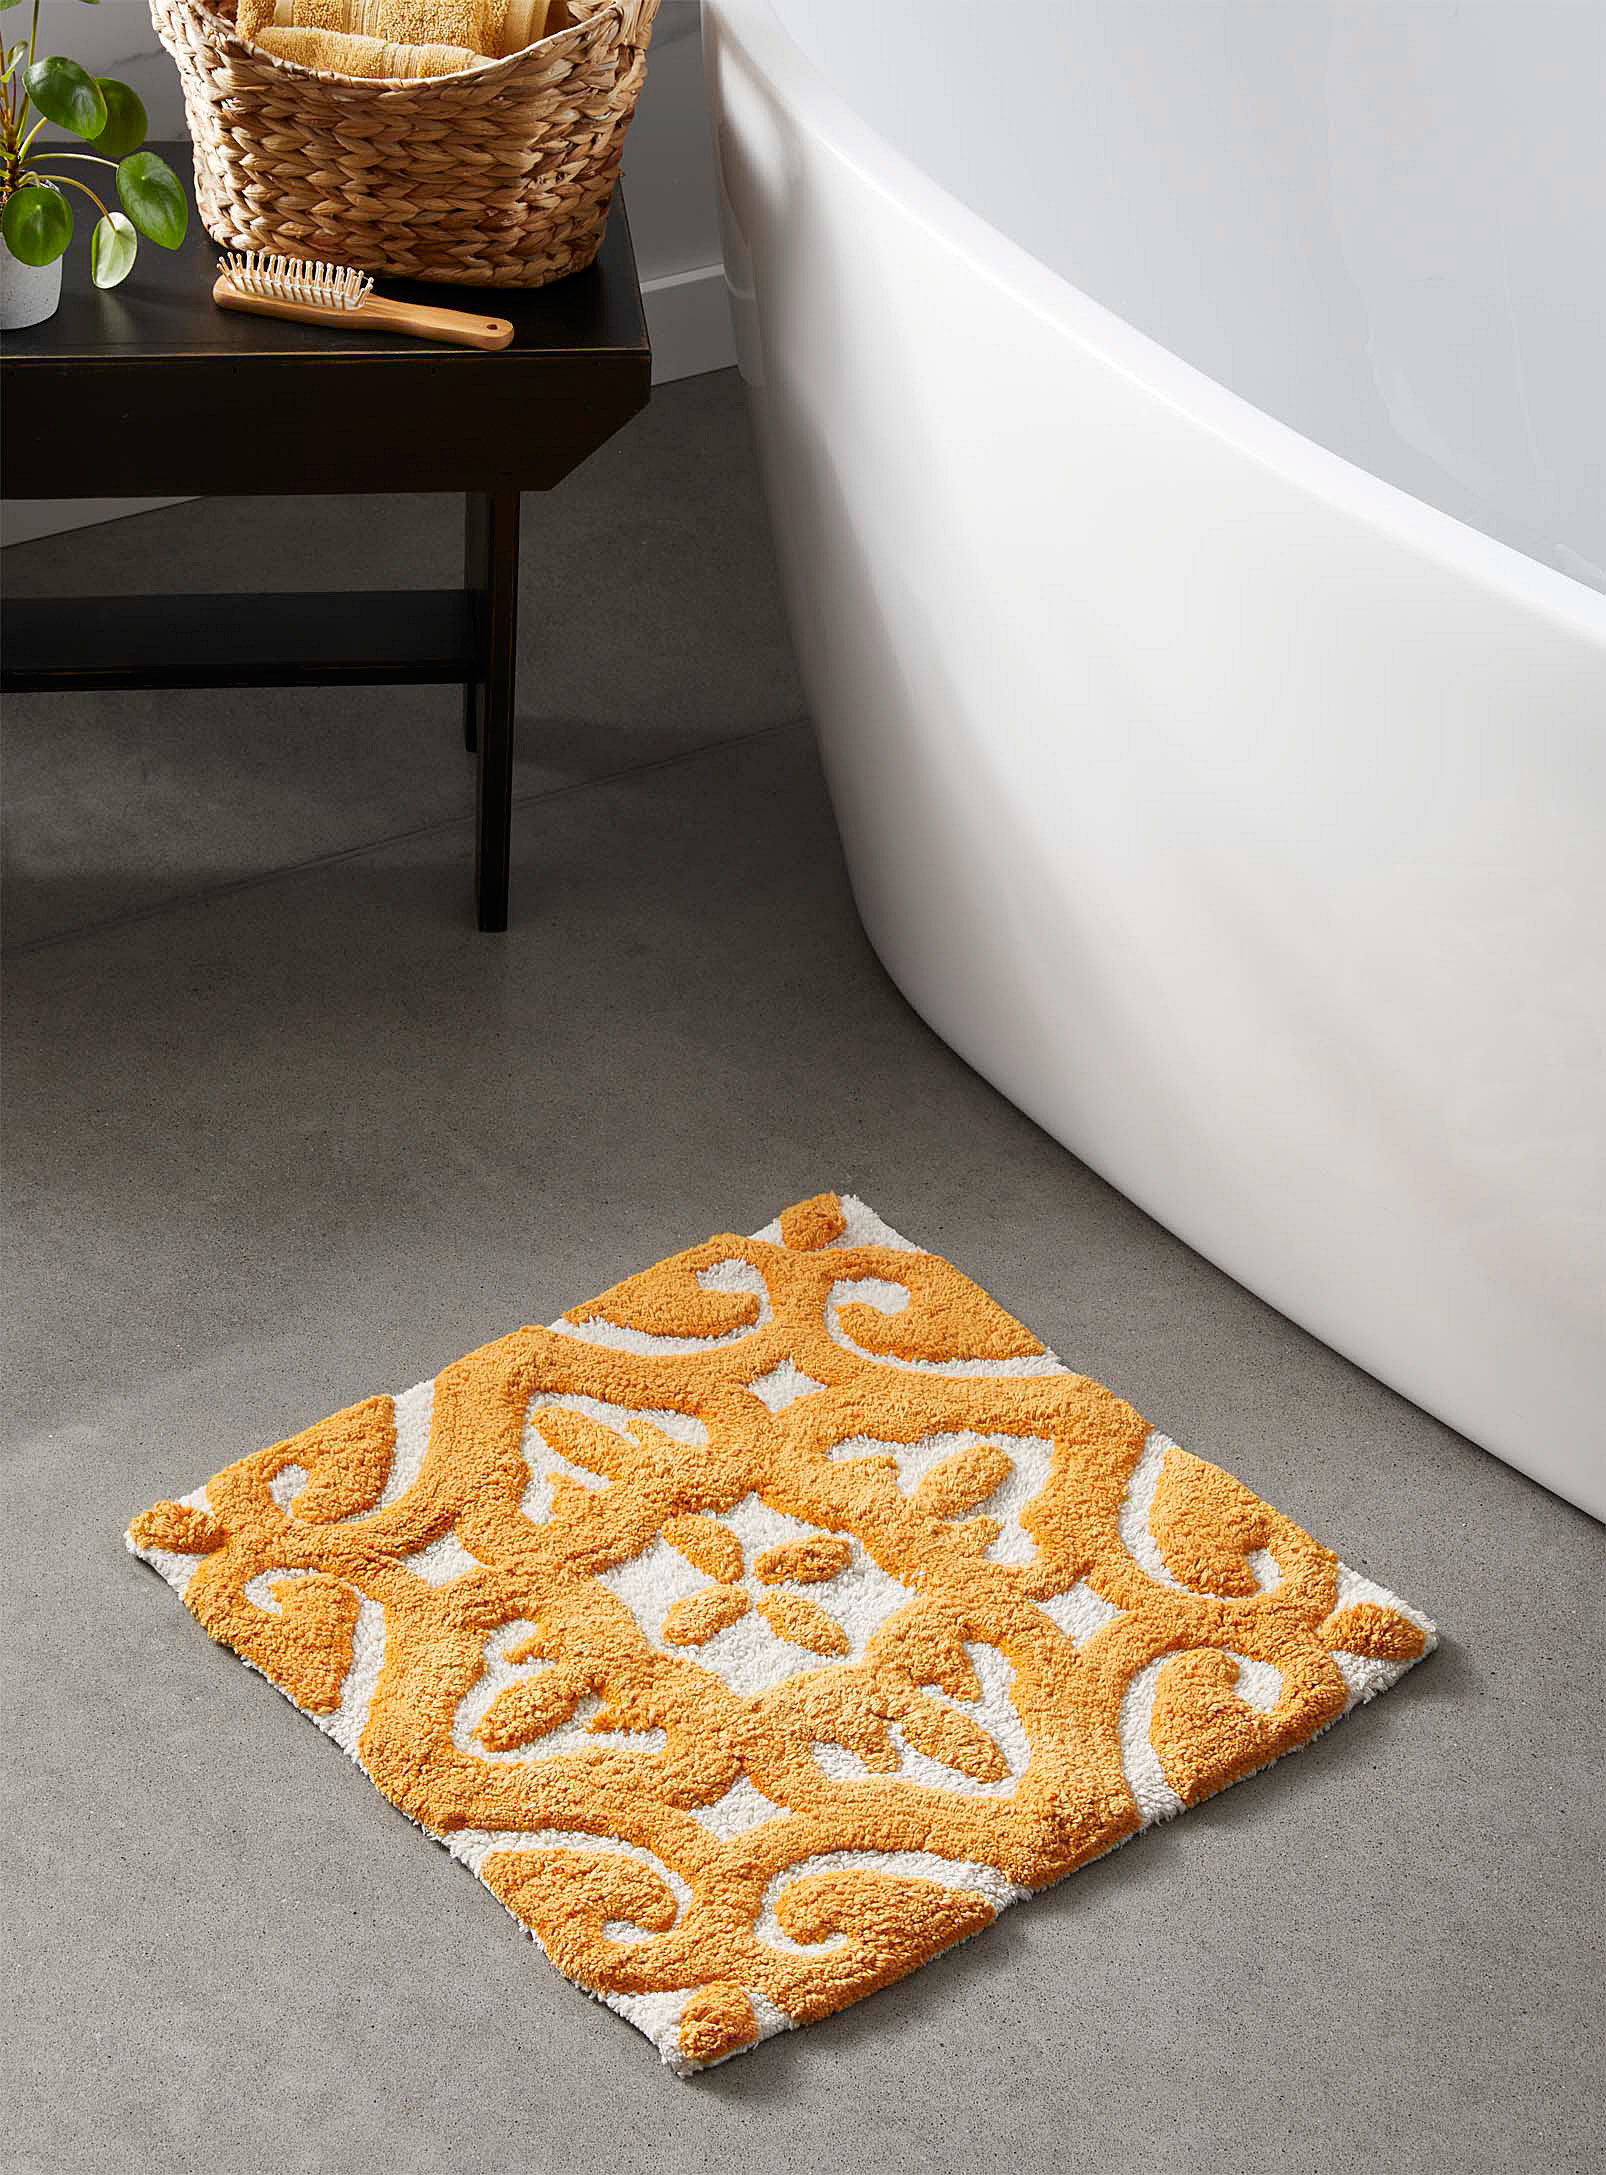 a square bath mat with colourful, moroccan-inspired designs